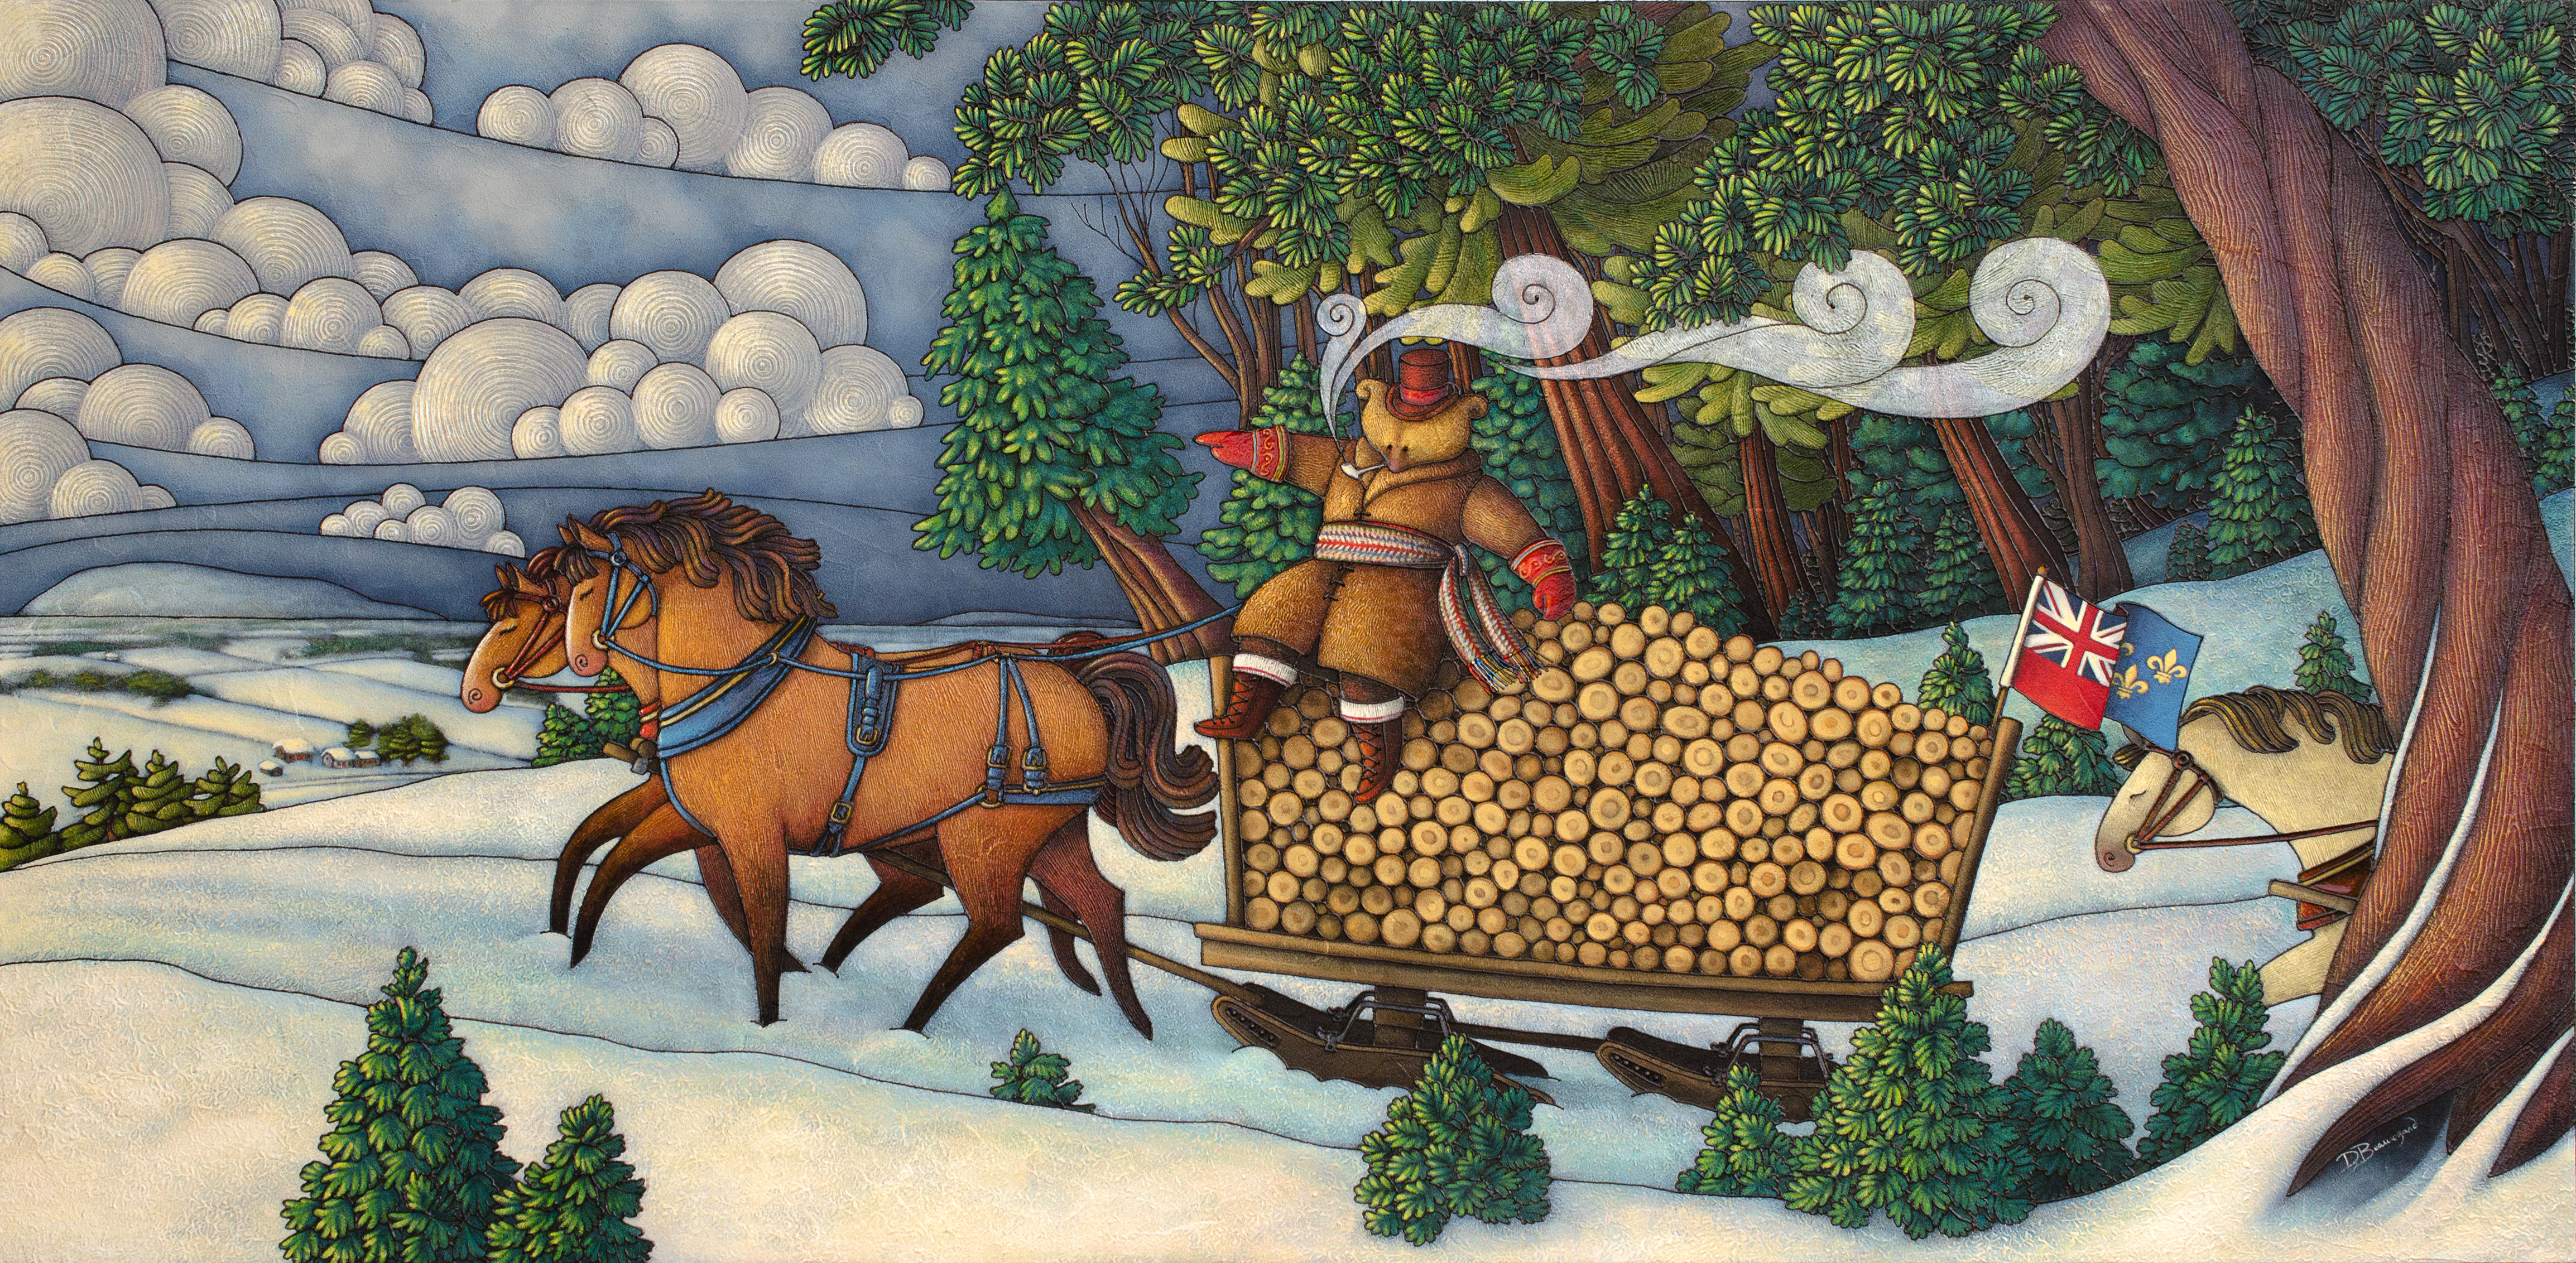 Allegorical painting depicting Curé Labelle as a bear in a cassock seated on a sleigh laden with logs and drawn by two horses. The scene is set in winter.